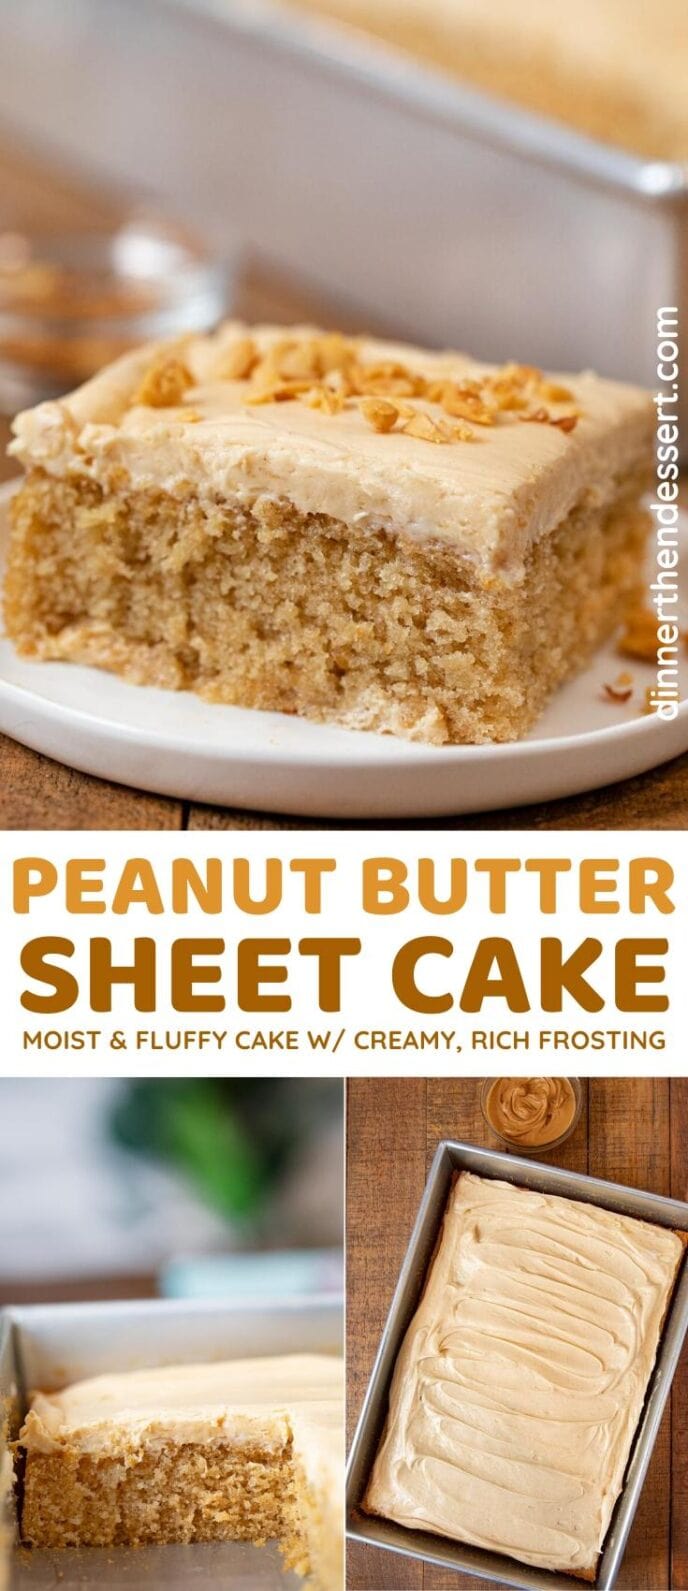 Peanut Butter Sheet Cake collage